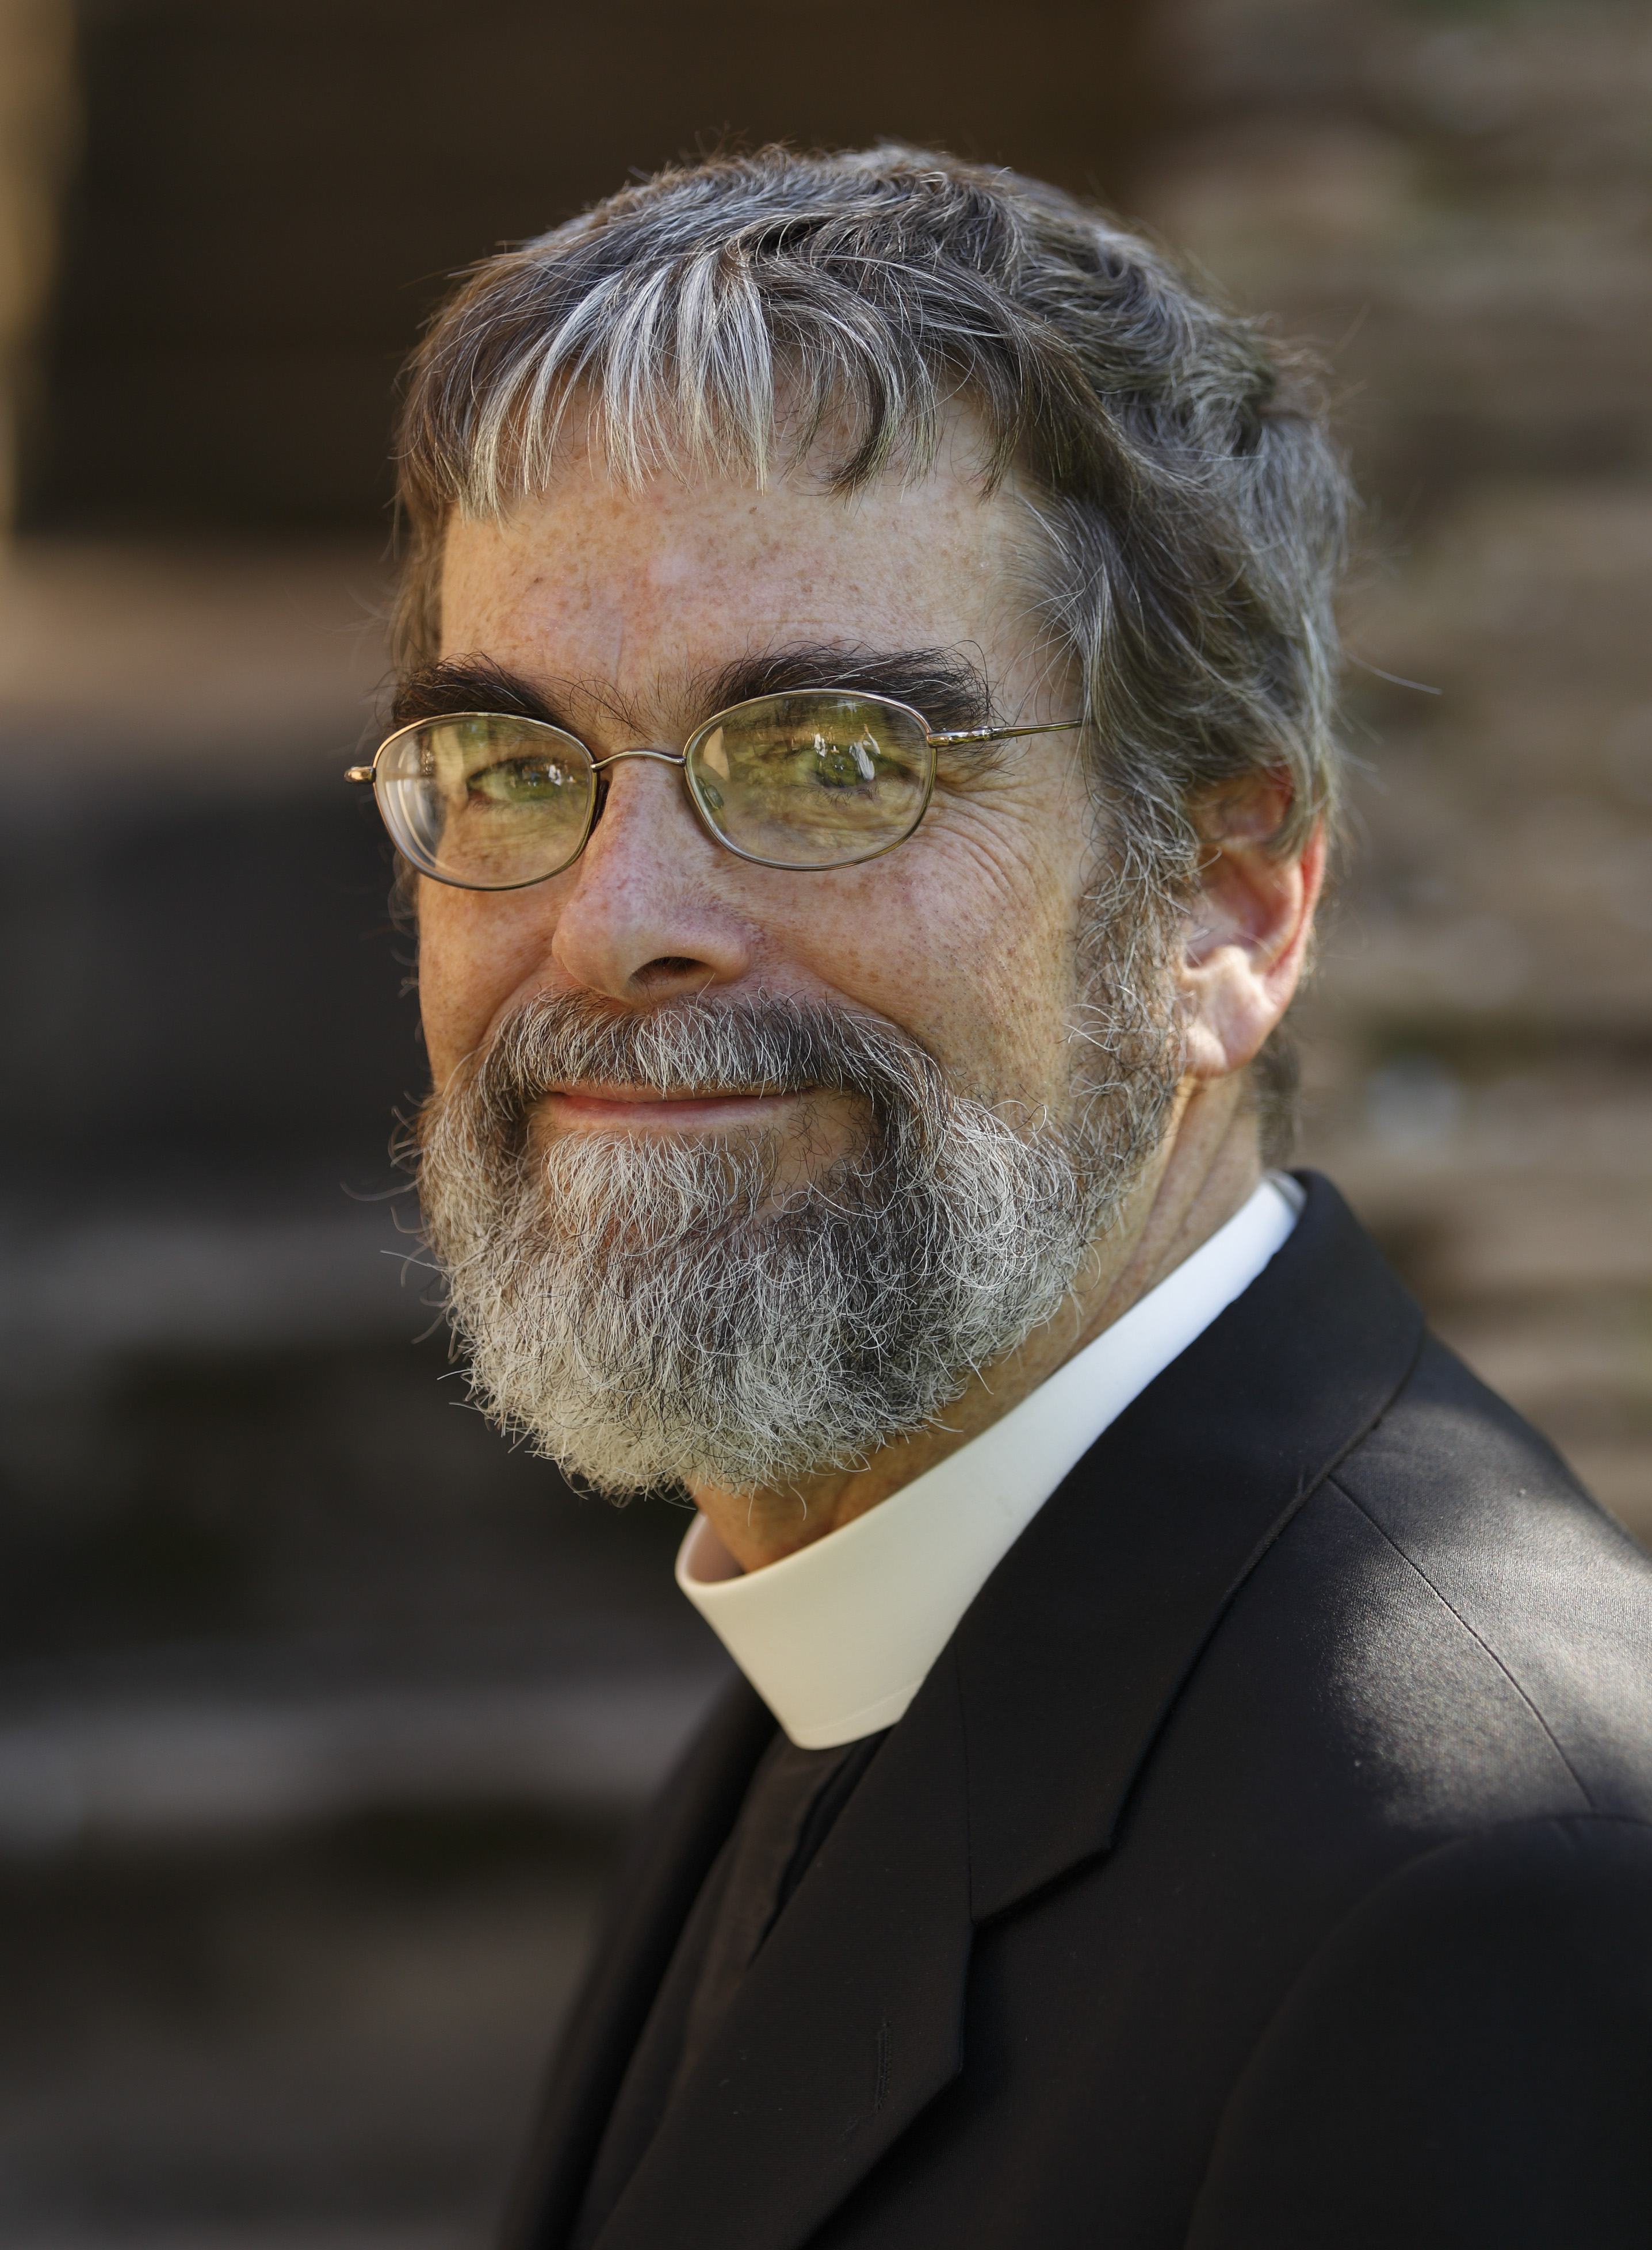 US JESUIT BROTHER GUY CONSOLMAGNO, VATICAN ASTRONOMER